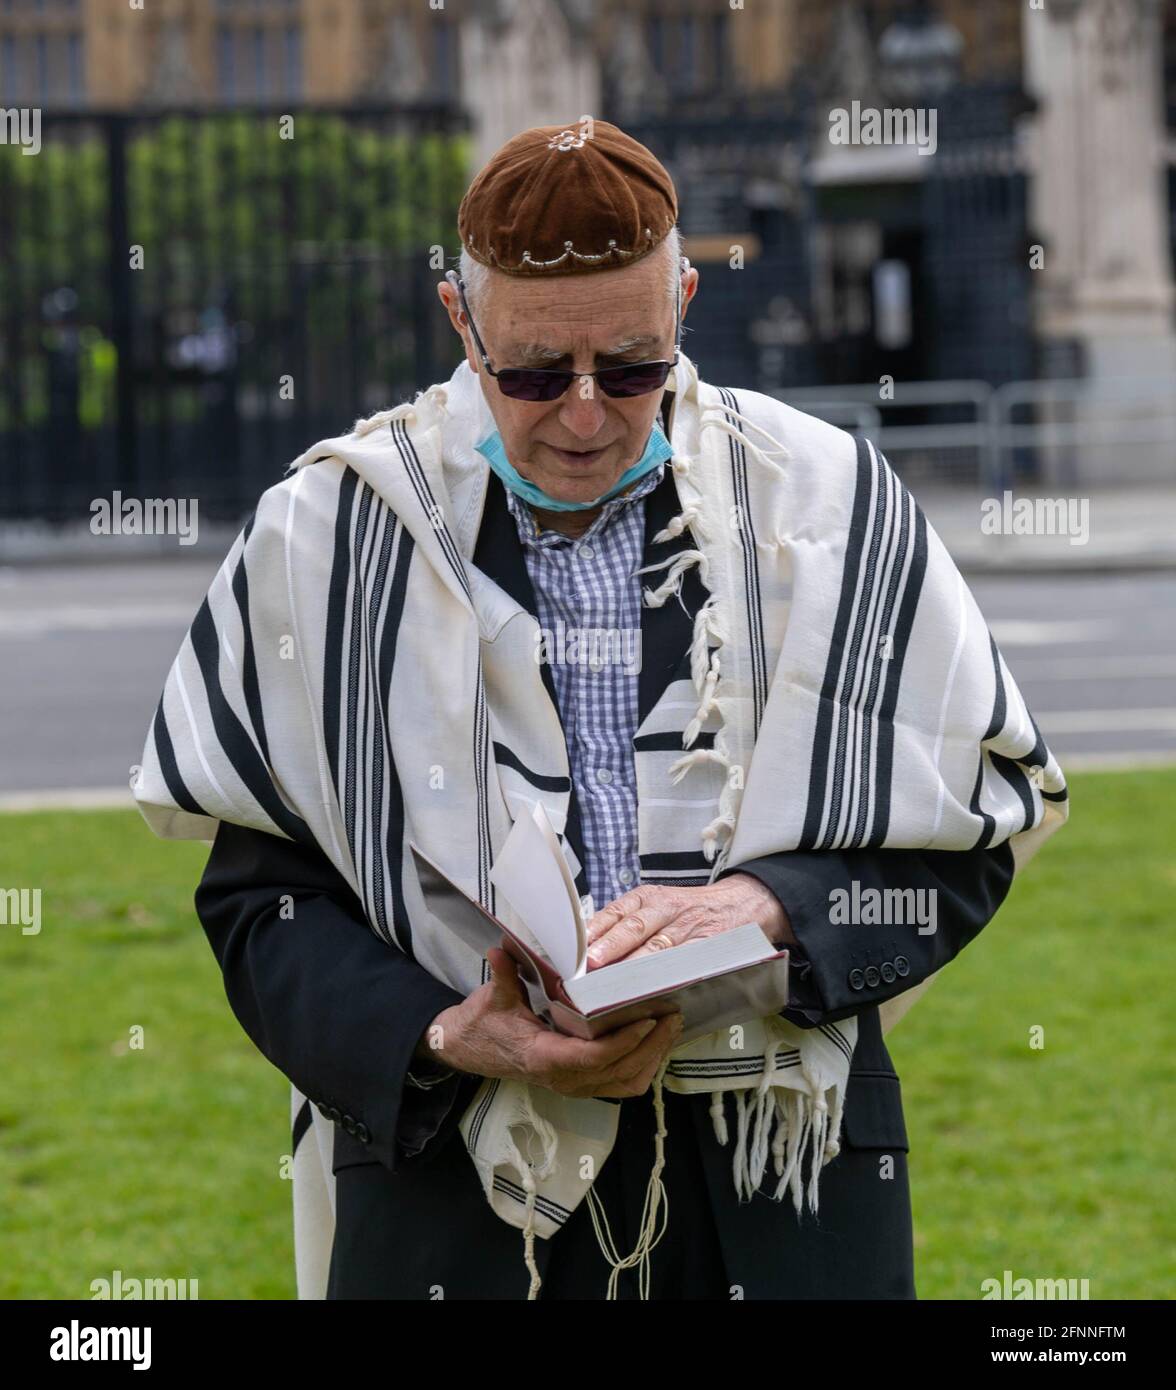 London, UK. 18th May, 2021. Rabbi Jeffery Newman praying outside the House of Commons for an end of the occupation of Paslestine, for the British Government to recognise Palestine and to support the Peoples initiative for Peace. Rabbi Newman is calling for 50% plus 1 British MP's to sign a statement of agreement to his demands. The Rabbi is planning to pray outside Parliment for several days. Credit: Ian Davidson/Alamy Live News Stock Photo